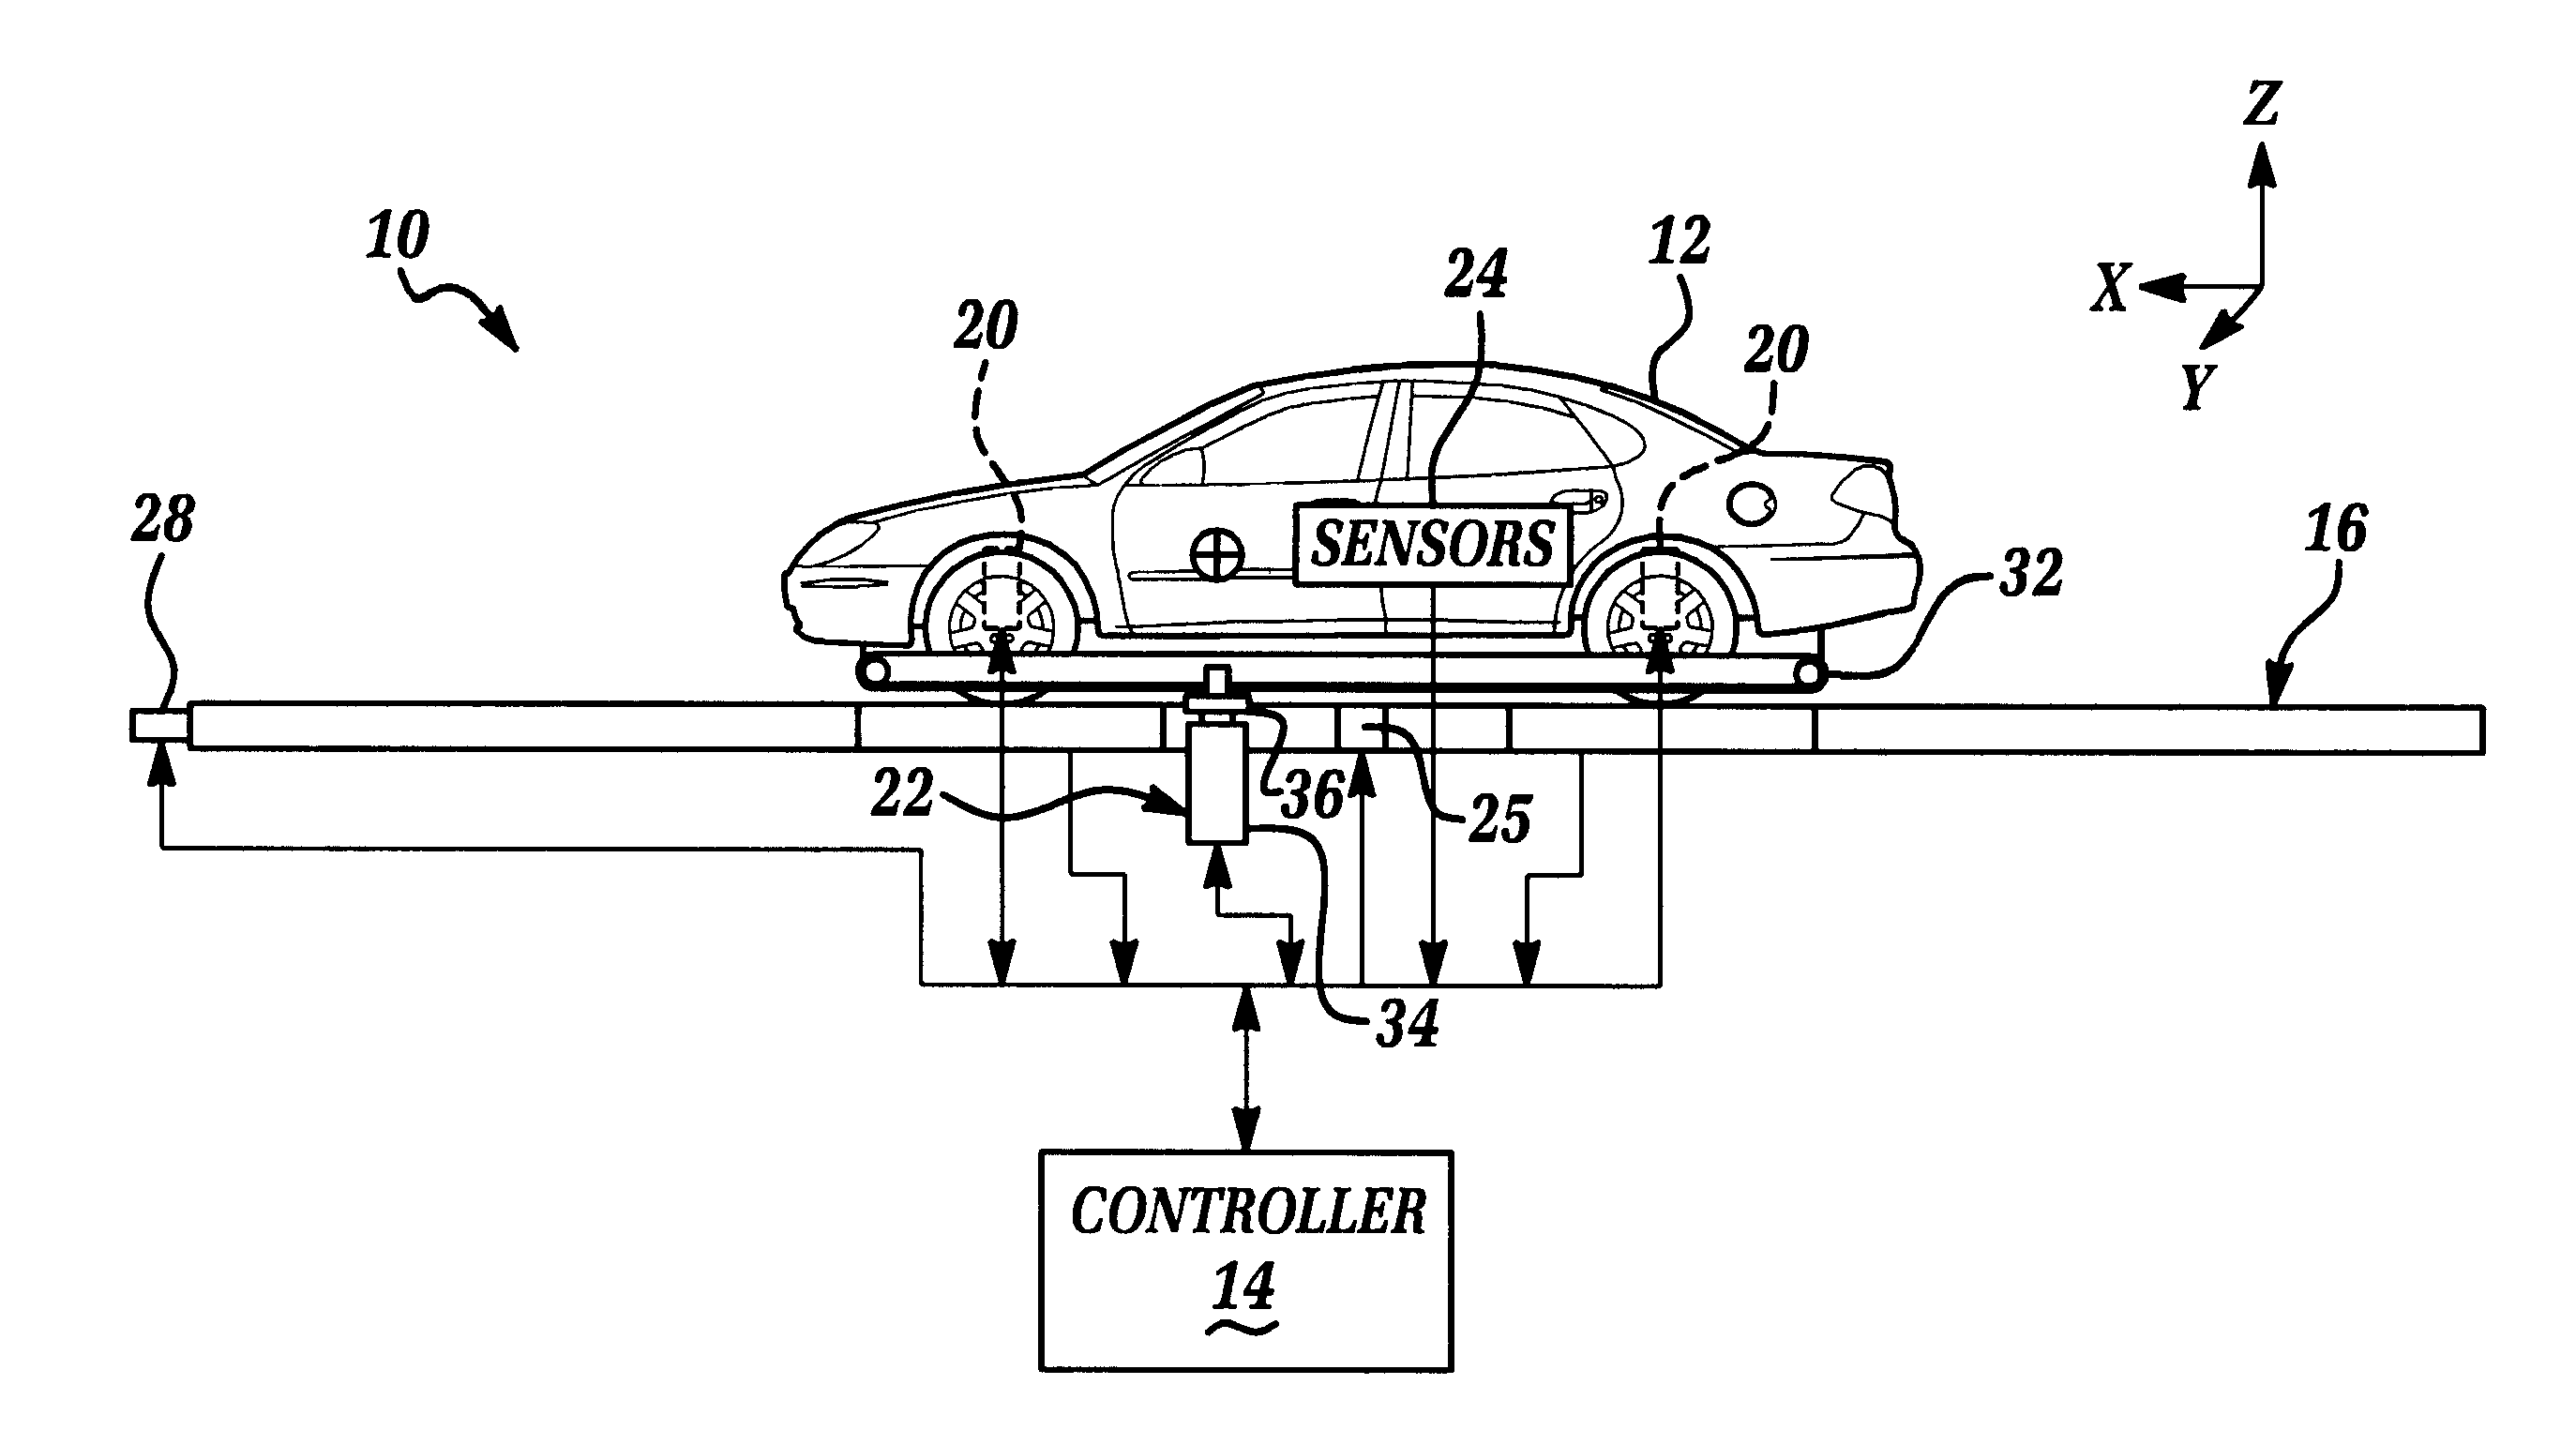 Method and apparatus for measuring the rollover resistance and compliance characteristics of a vehicle